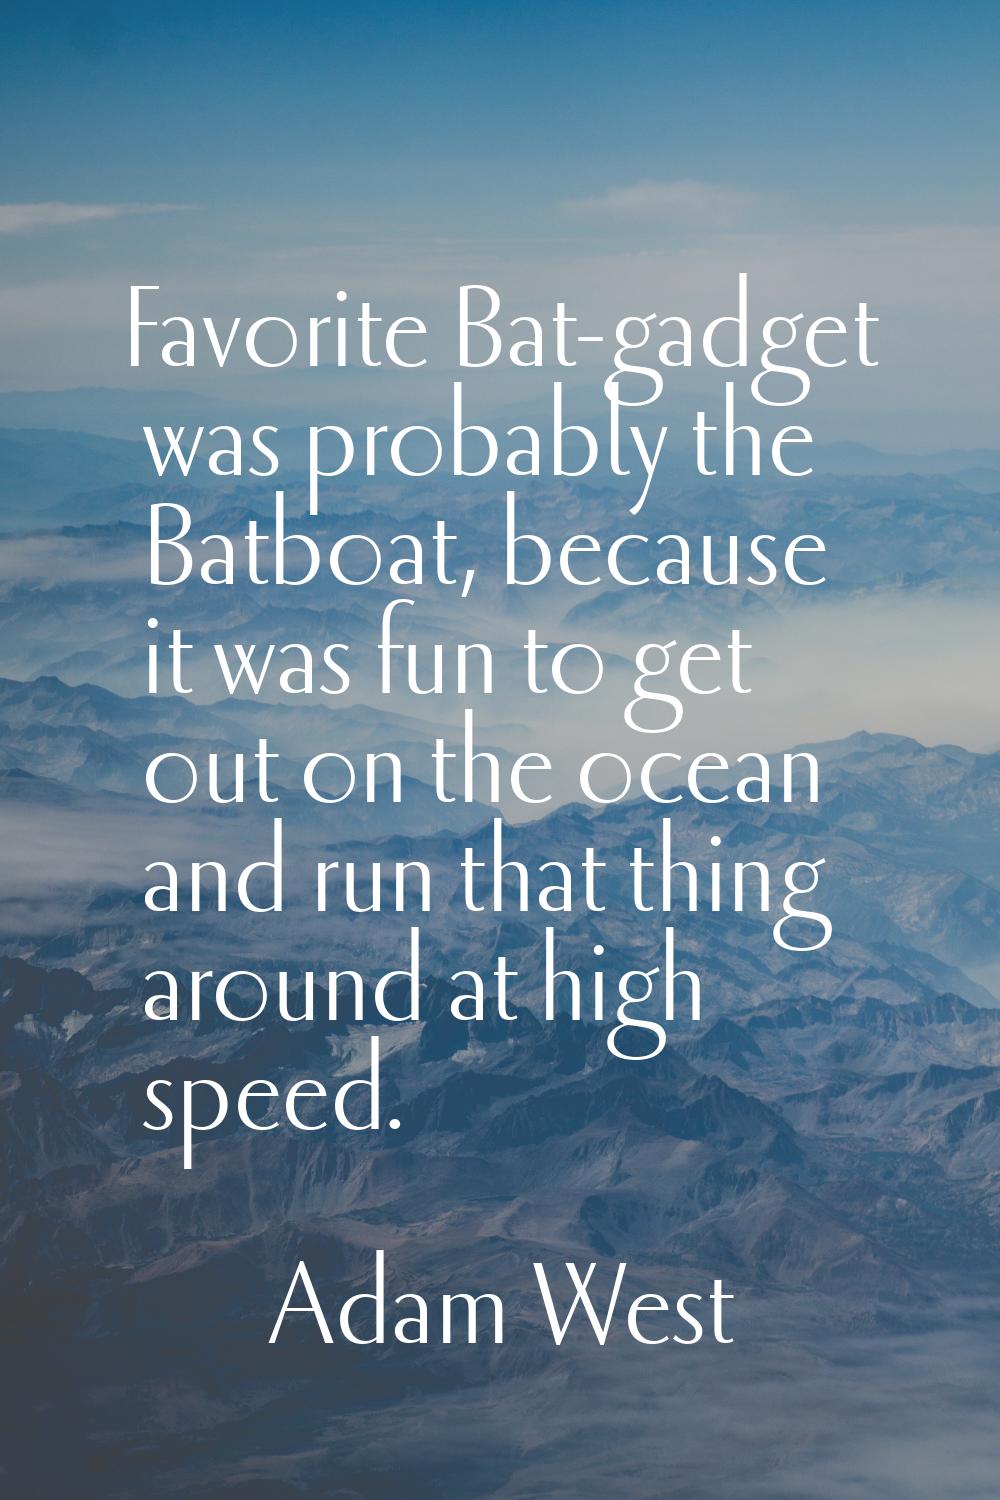 Favorite Bat-gadget was probably the Batboat, because it was fun to get out on the ocean and run th